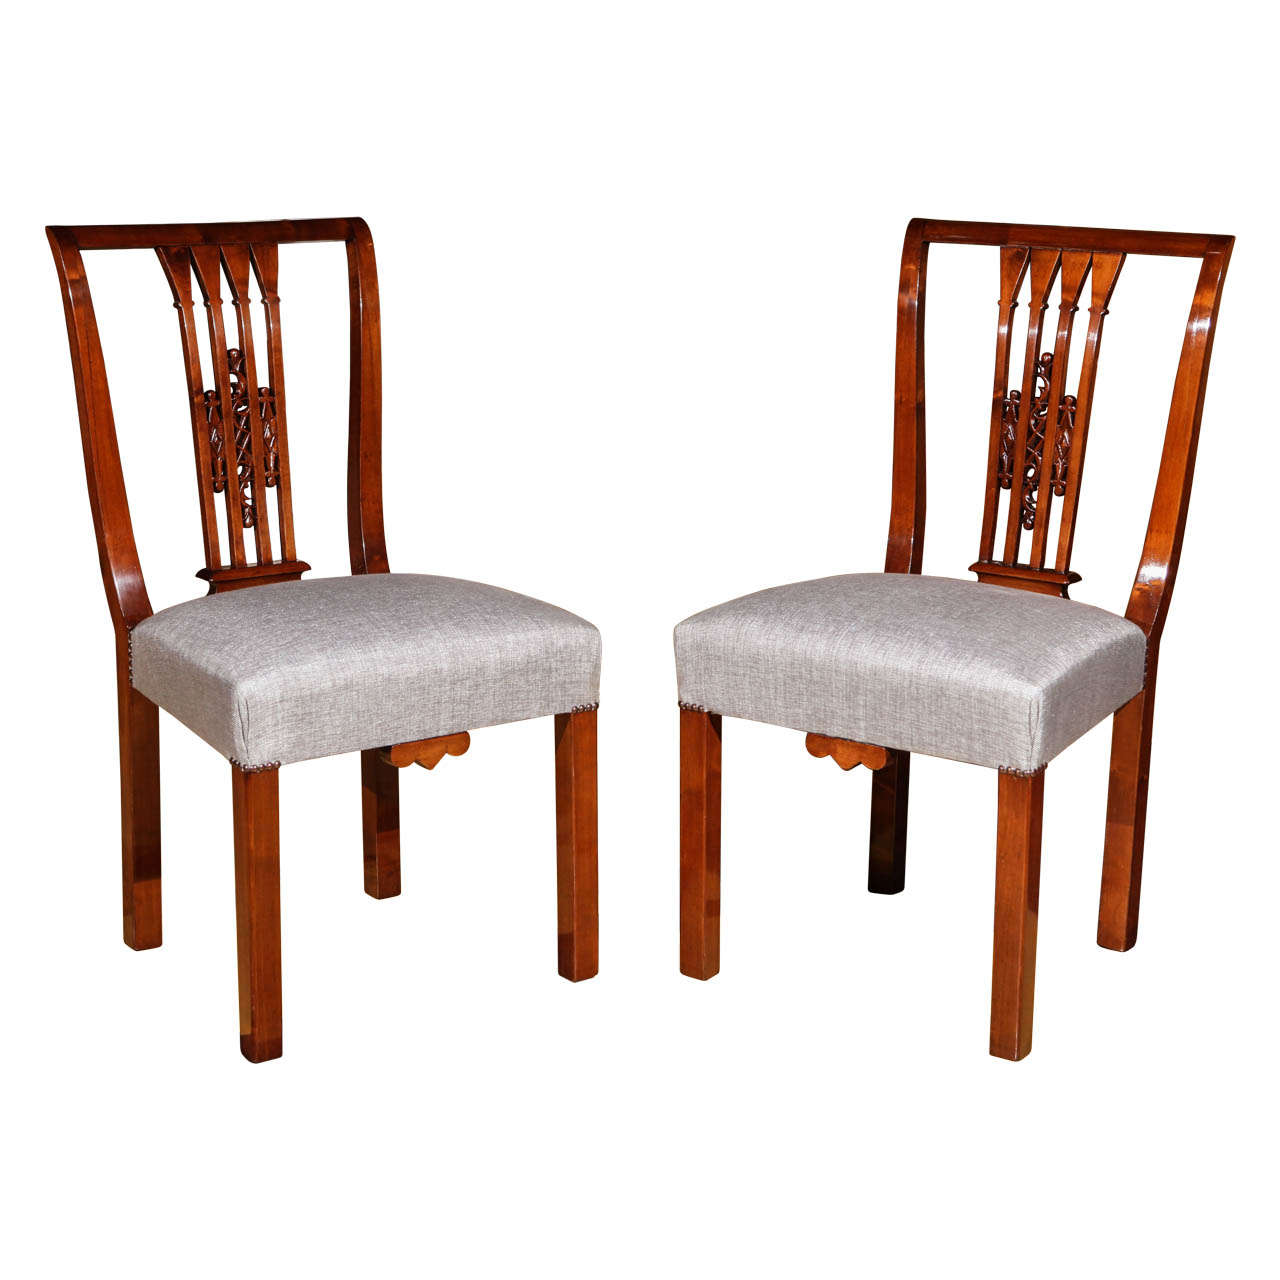 Pair of Hungarian Secessionist Chairs by Lajos Kozma For Sale